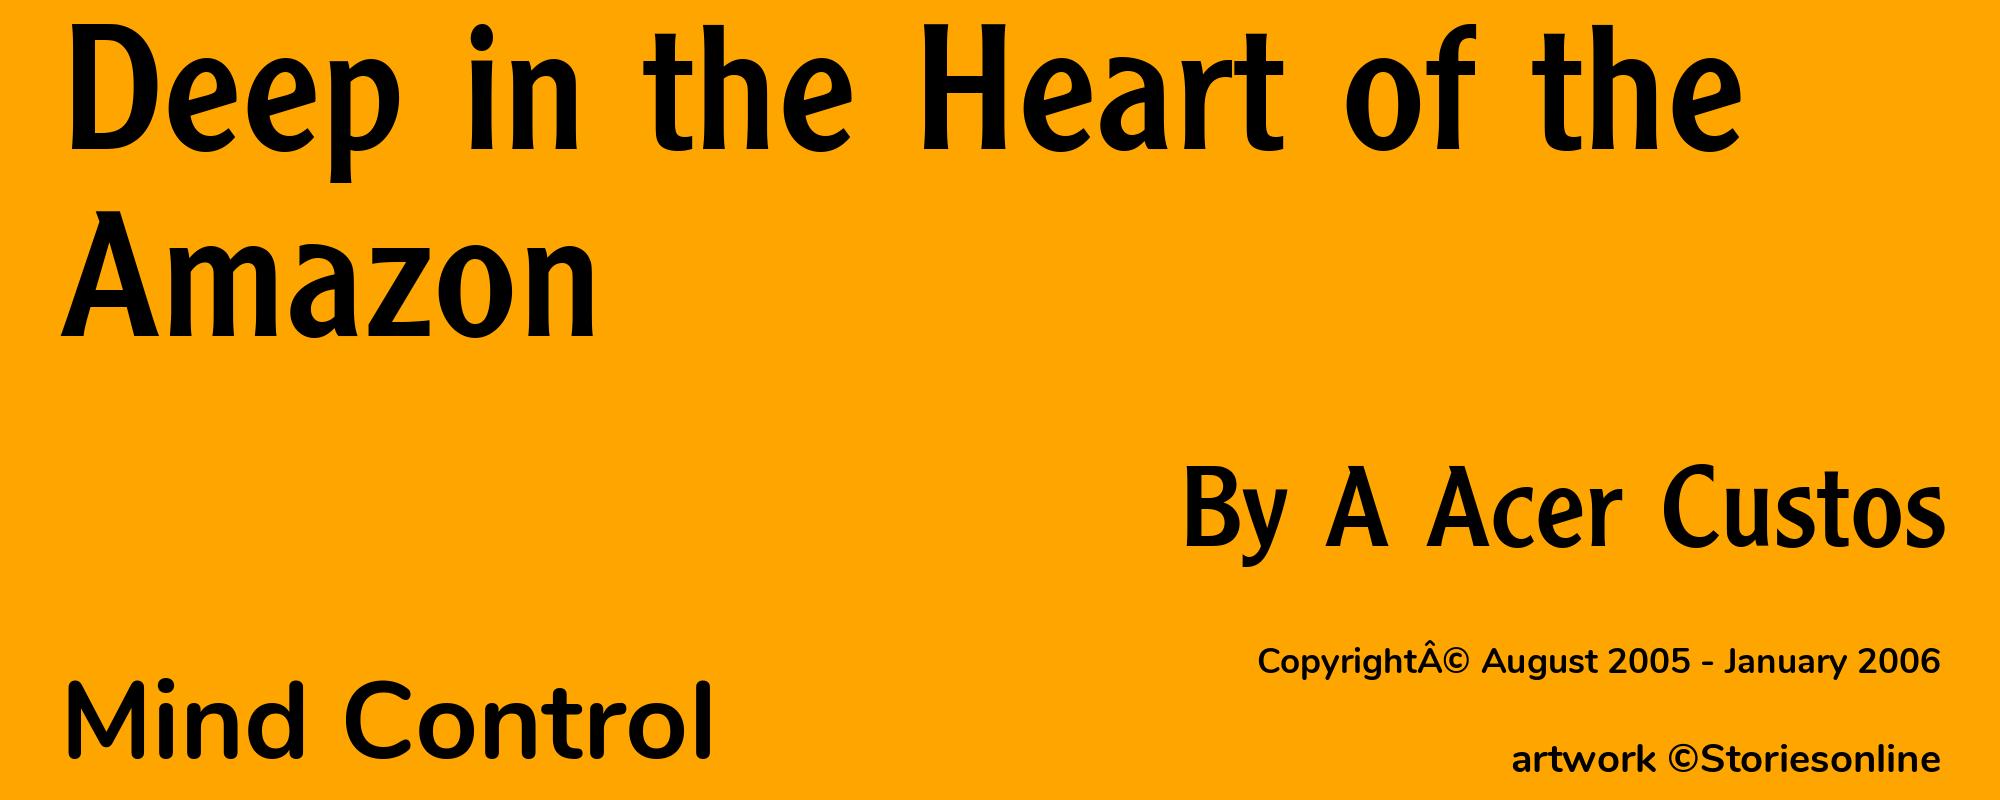 Deep in the Heart of the Amazon - Cover